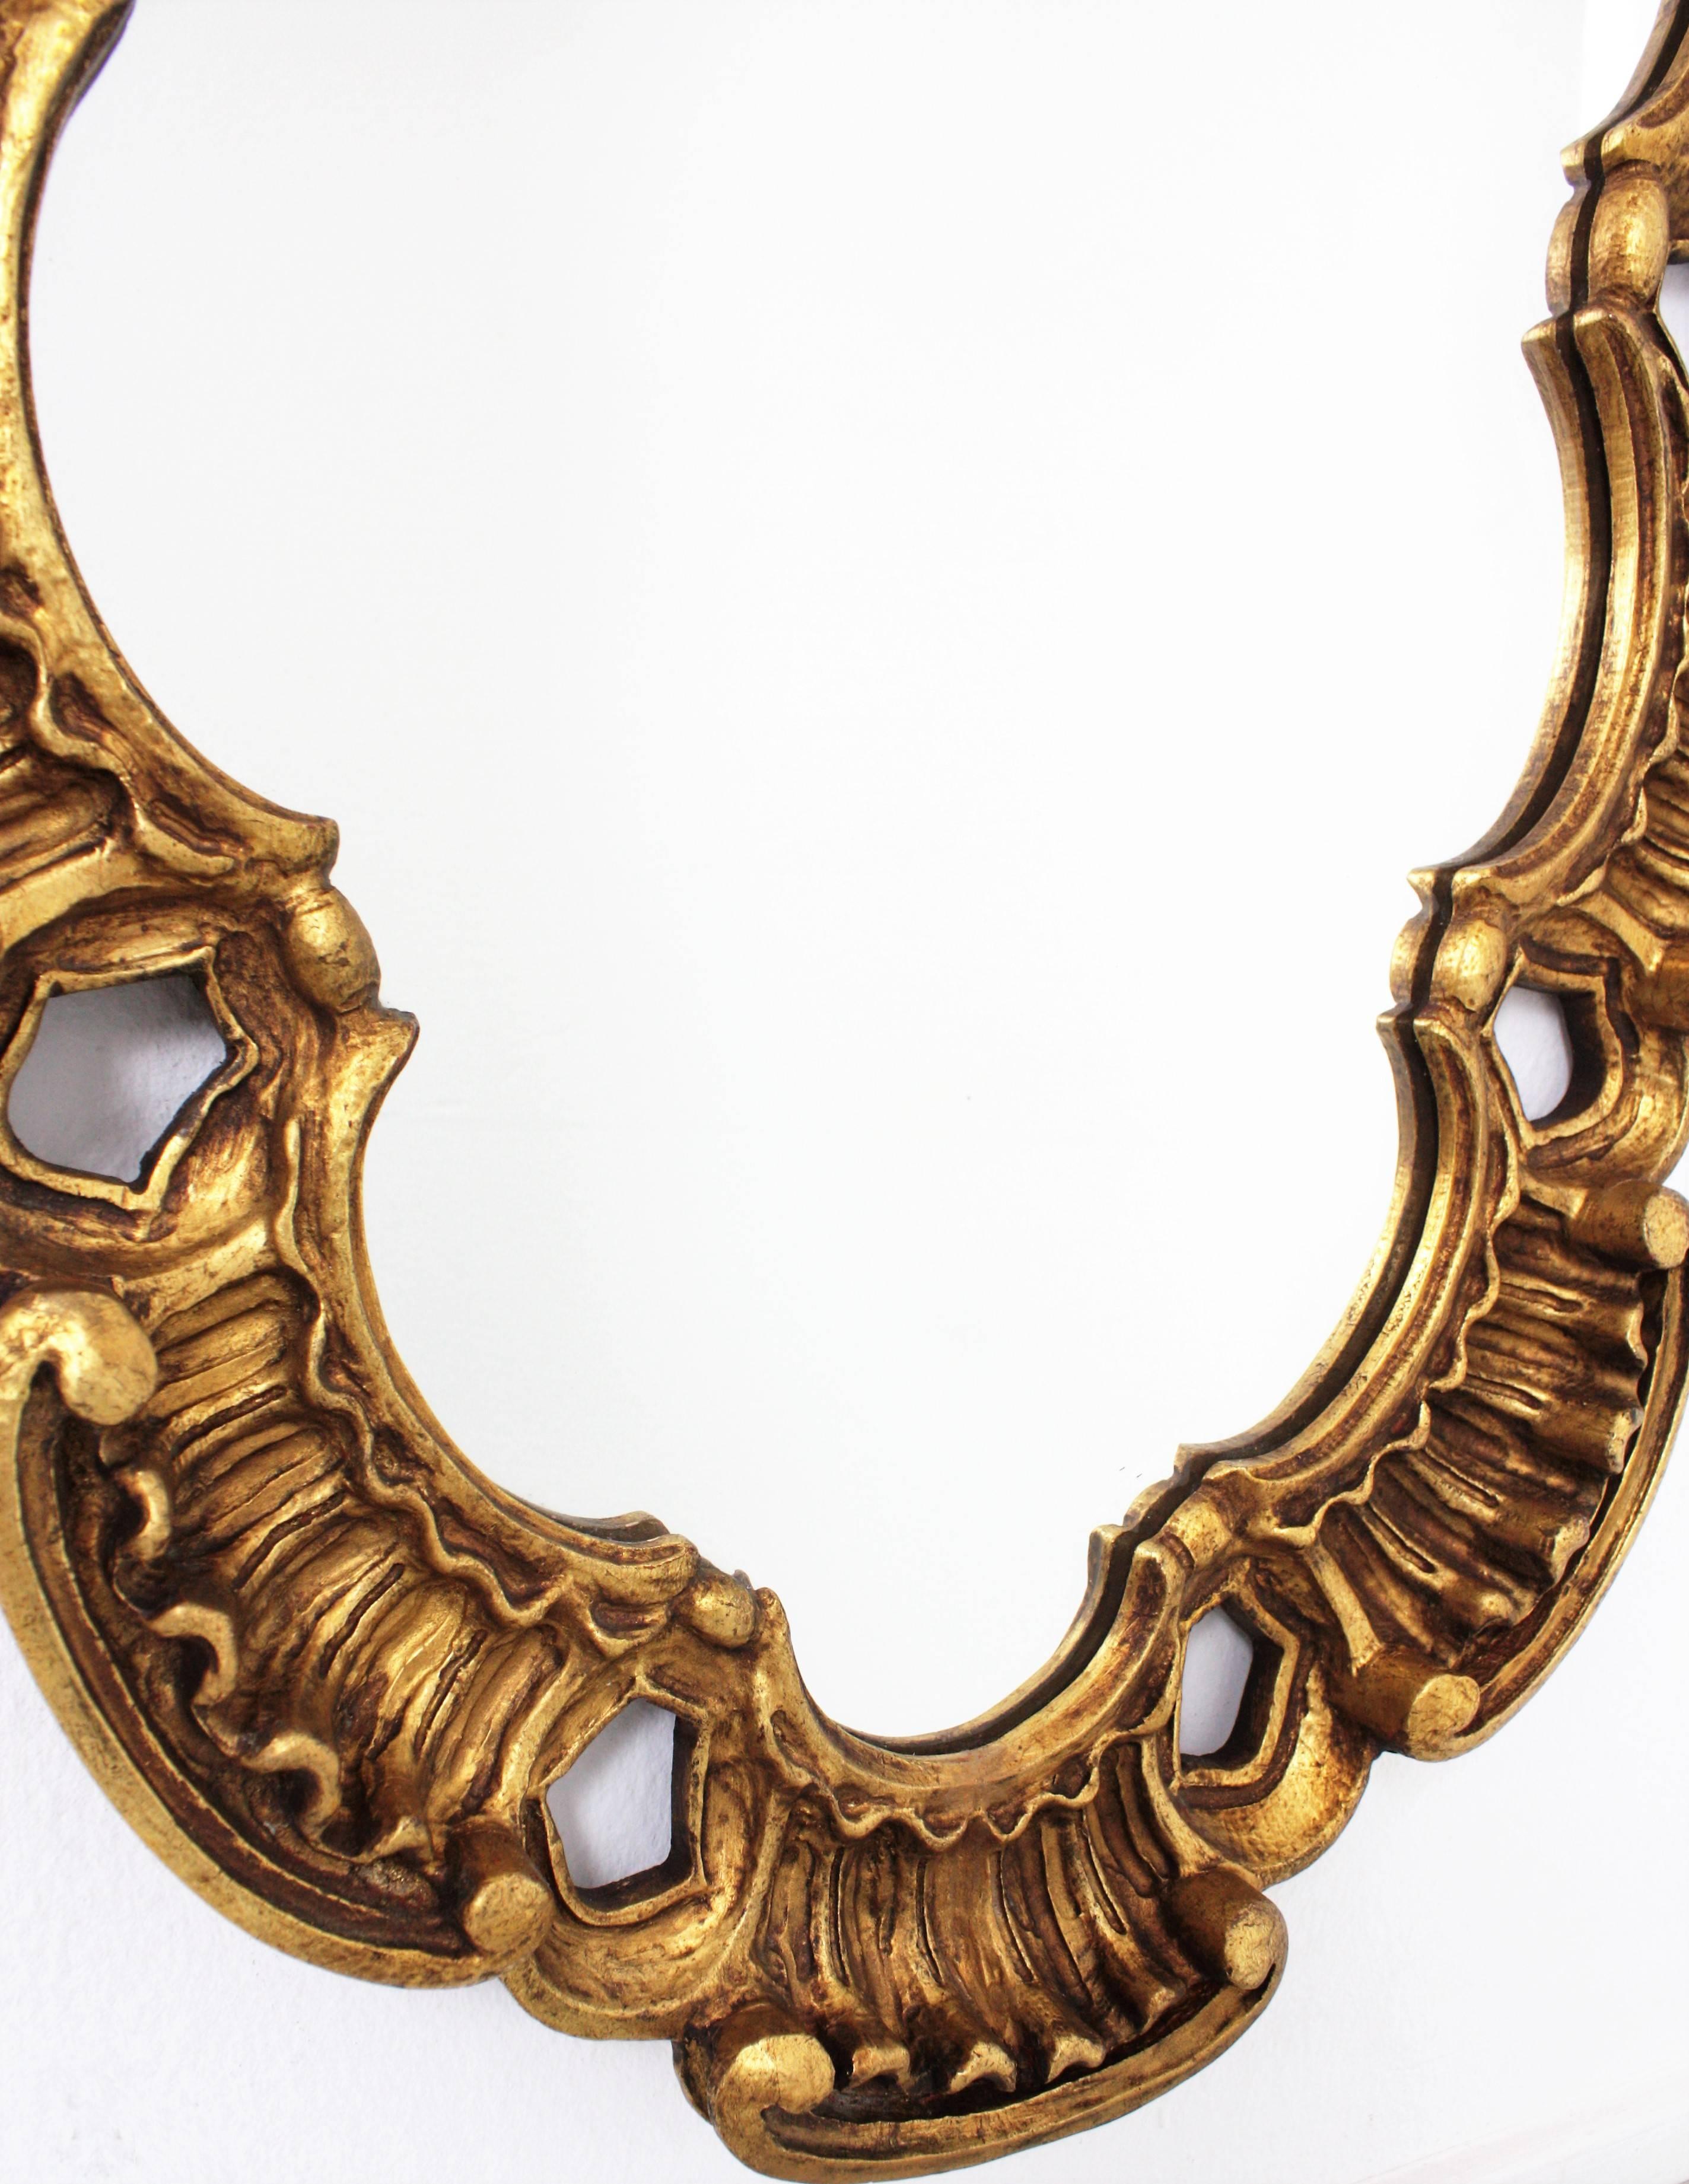 Hand-Crafted Spanish Gilt Carved Wood Oval Mirror by Francisco Hurtado, 1950s For Sale